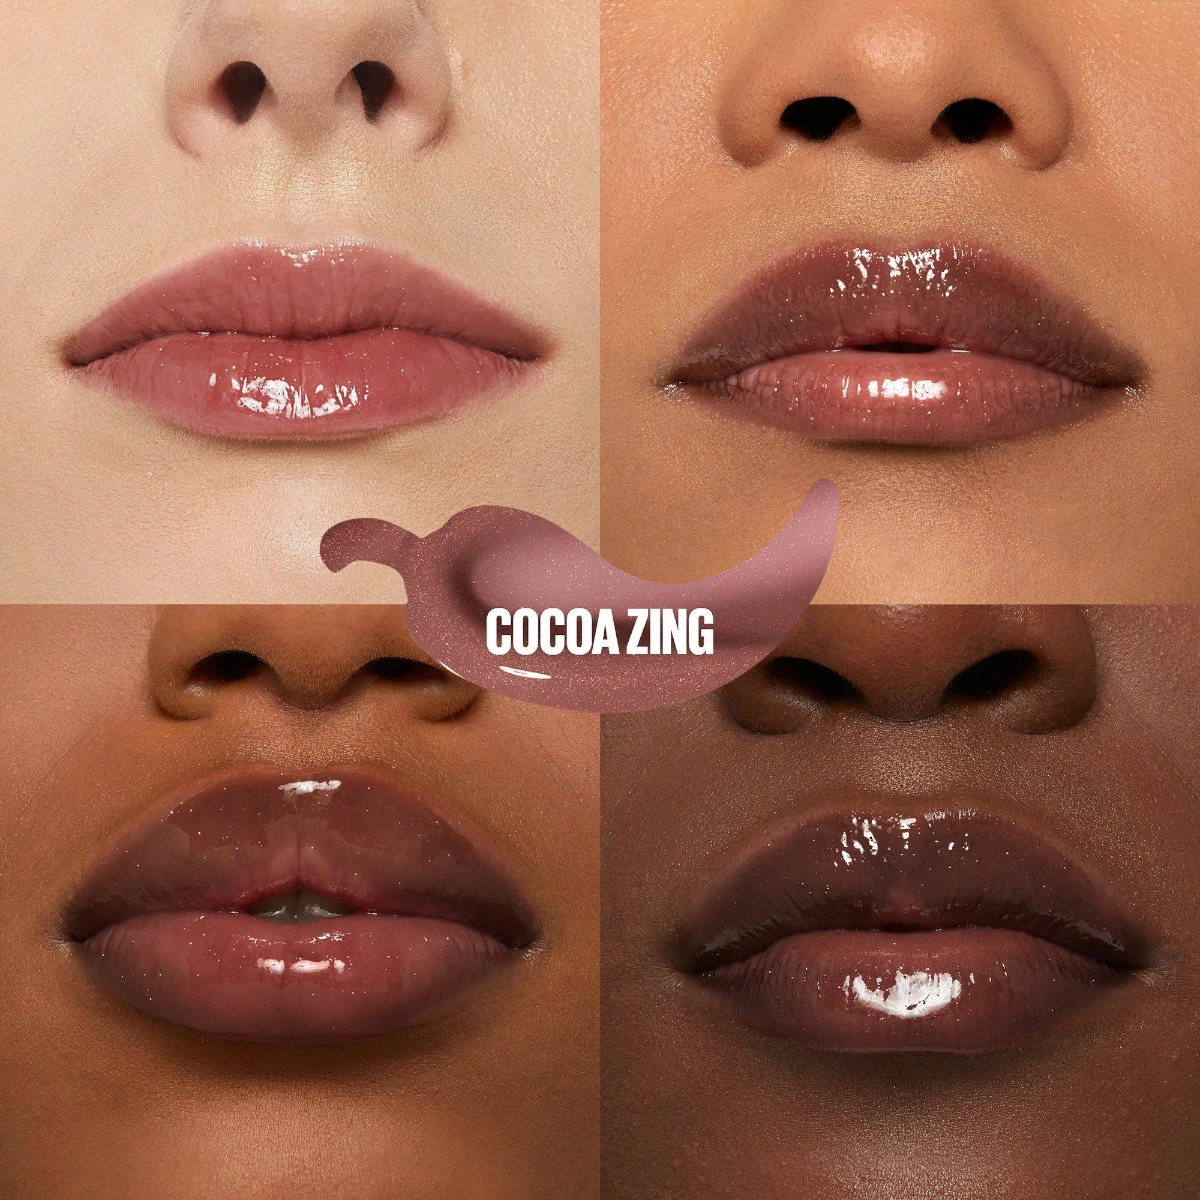 maybelline-Lifter-Plump-Cocoa-Zing-swatches